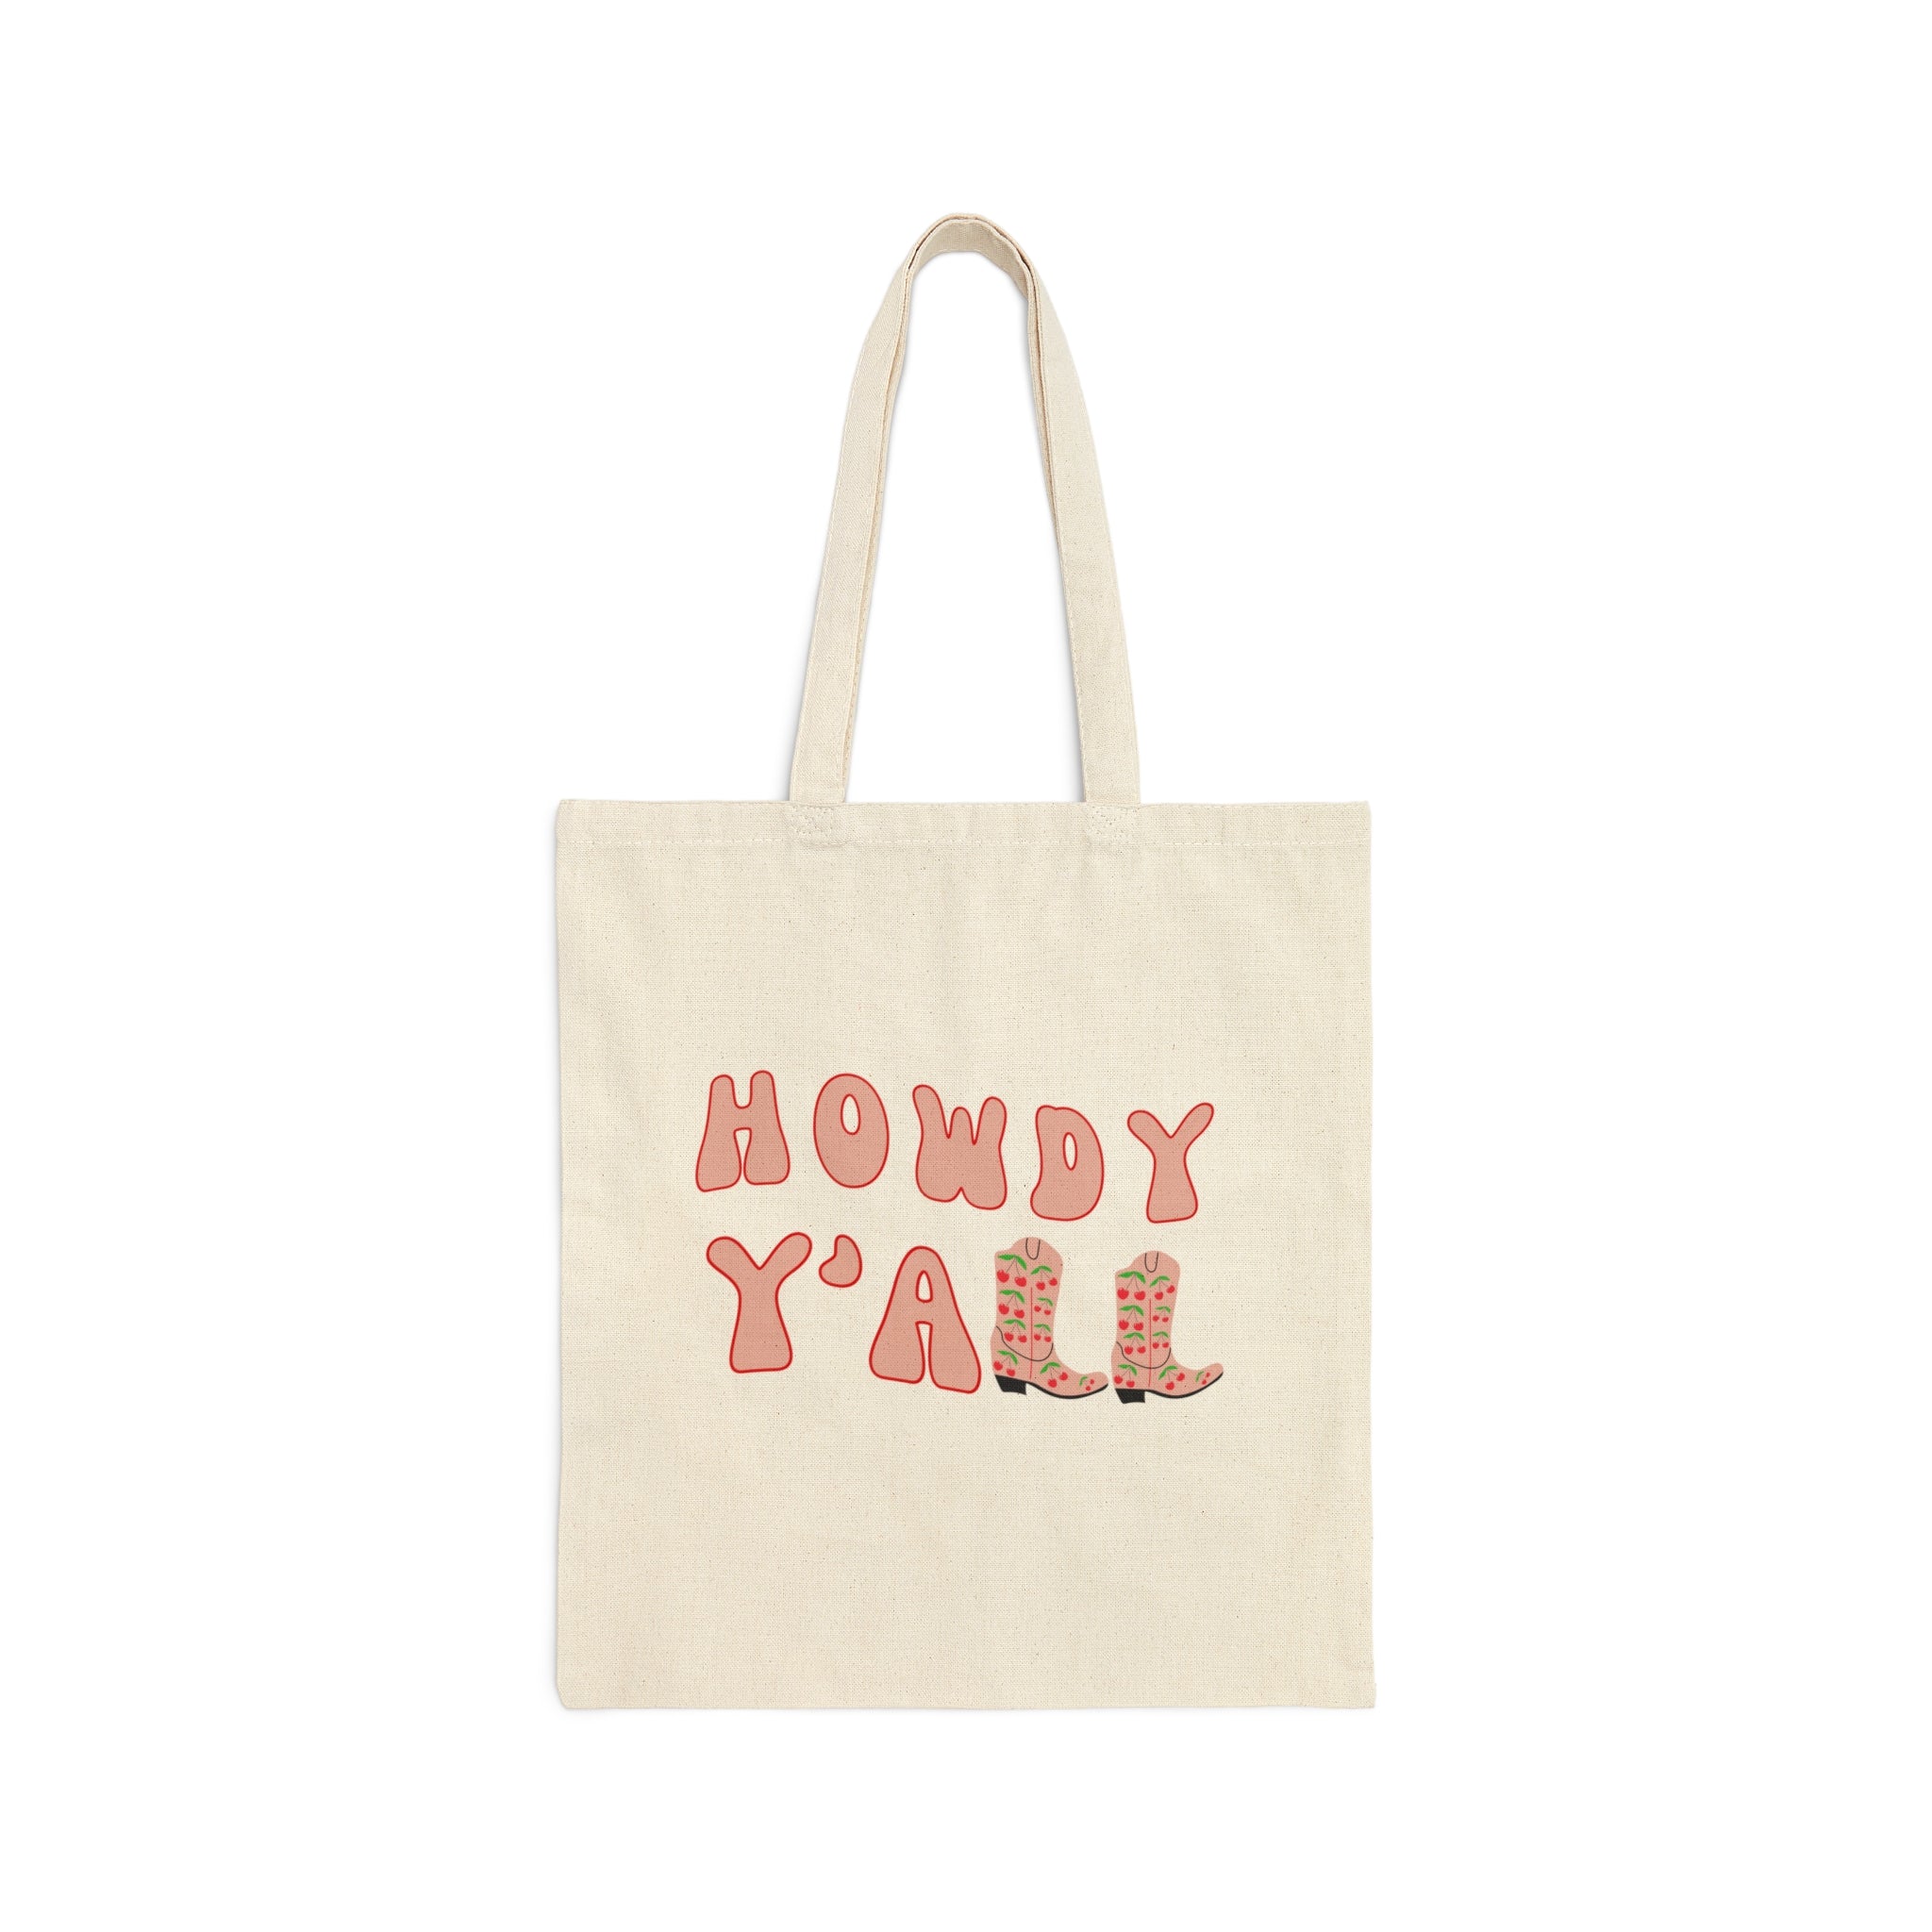 HOWDY Y'ALL Cherrie Boots Tote Bag